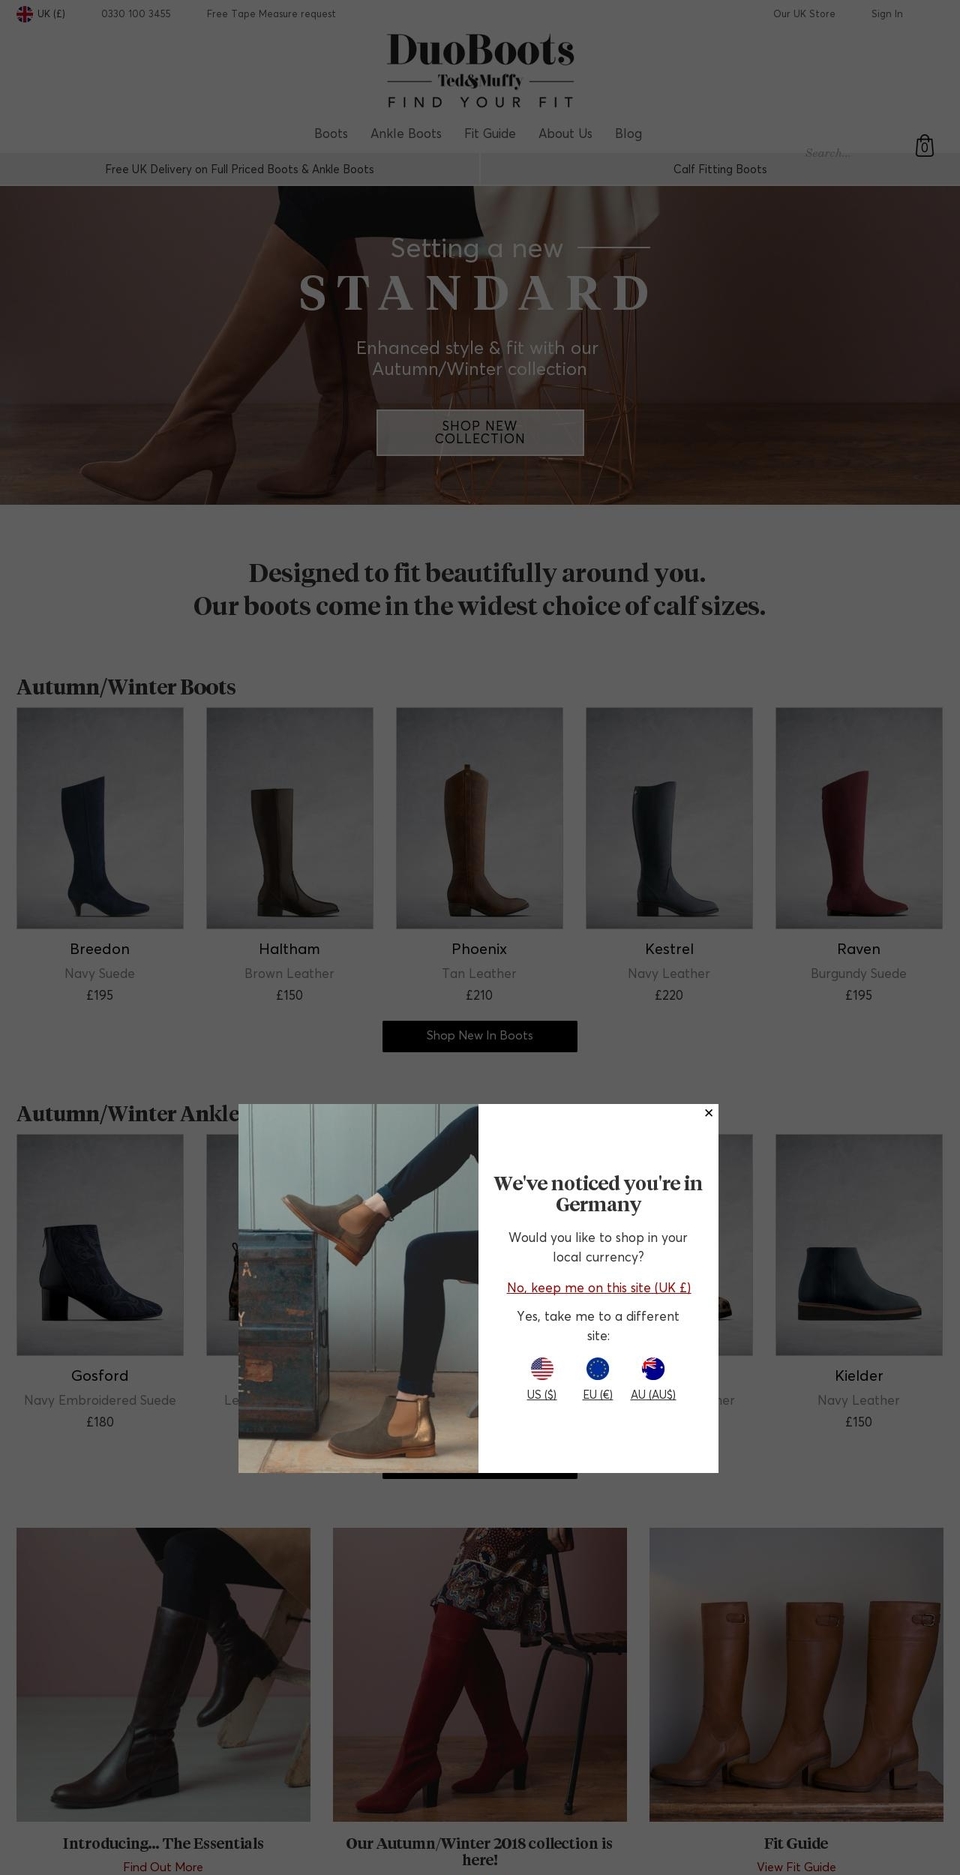 DuoBoots GBP V4.2 Shopify theme site example duoboots.clothing